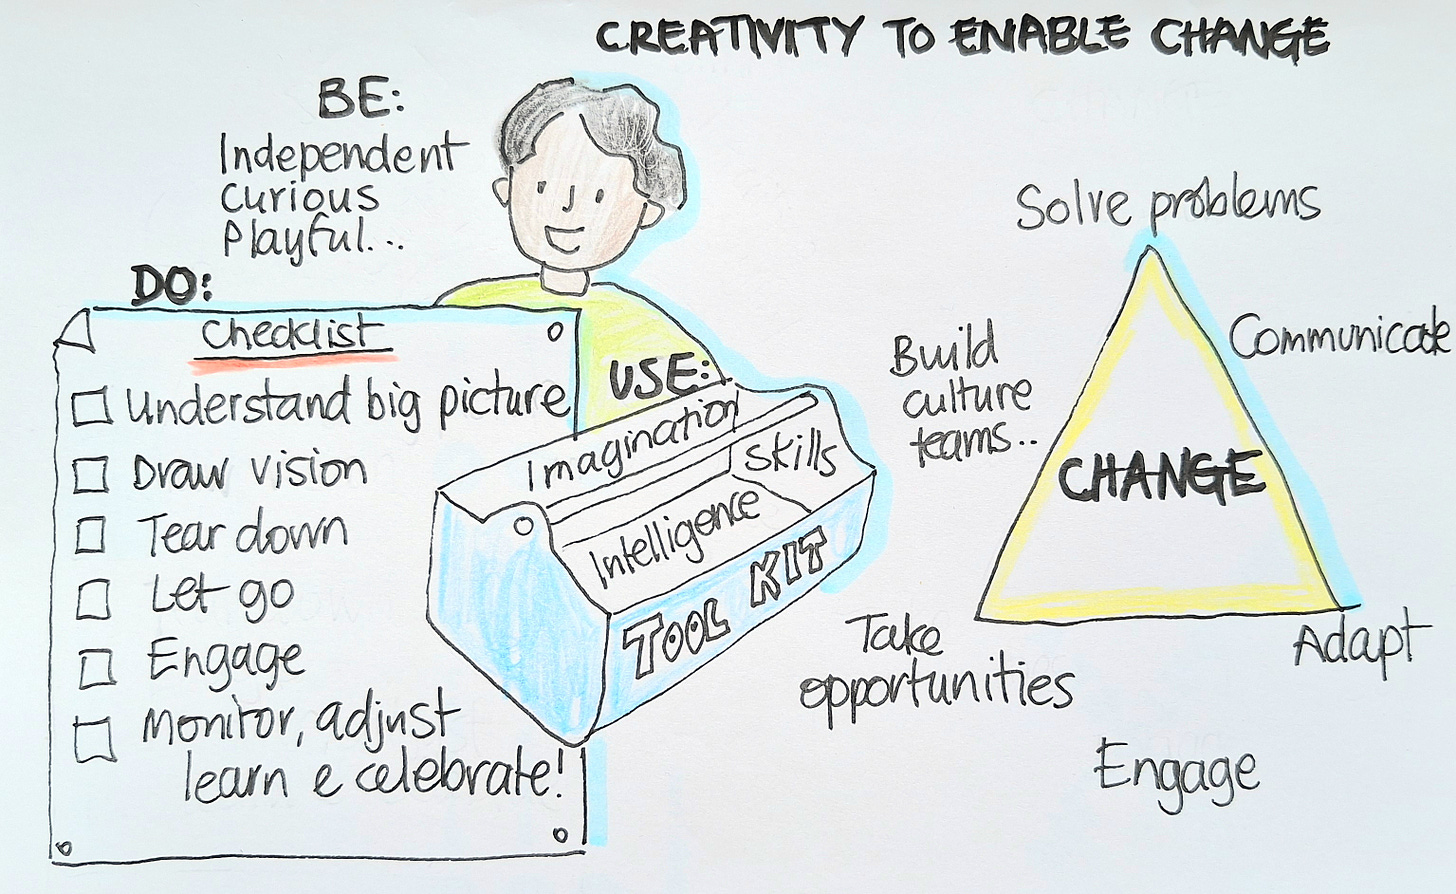 Cartoon sketch of a creative person, toolkit and checklist to enable change.  